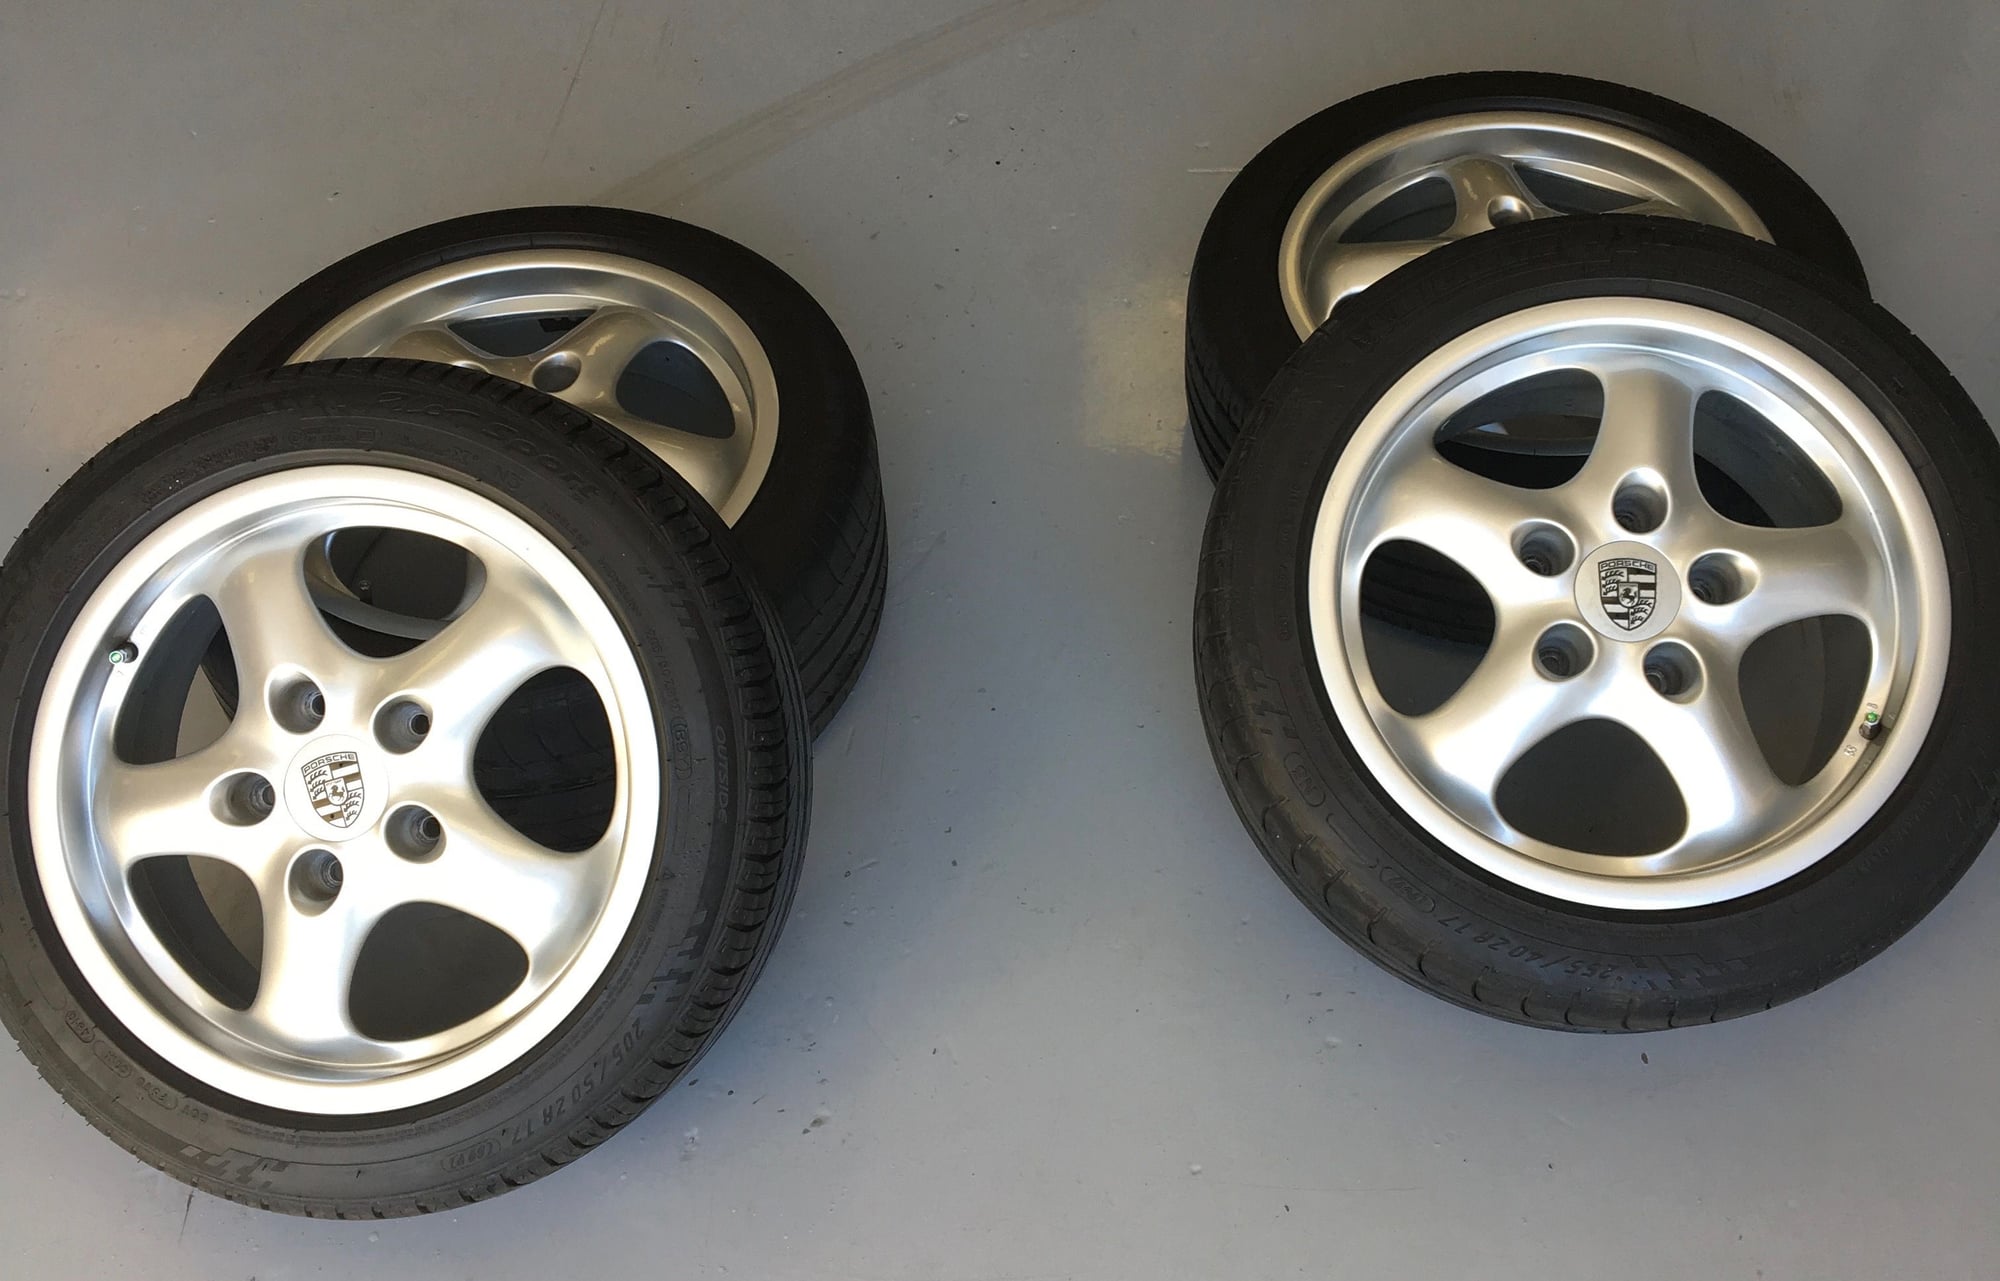 Wheels and Tires/Axles - Porsche 911 Wheels and Tires - Used - 1984 to 1998 Porsche 911 - Tampa, FL 33611, United States